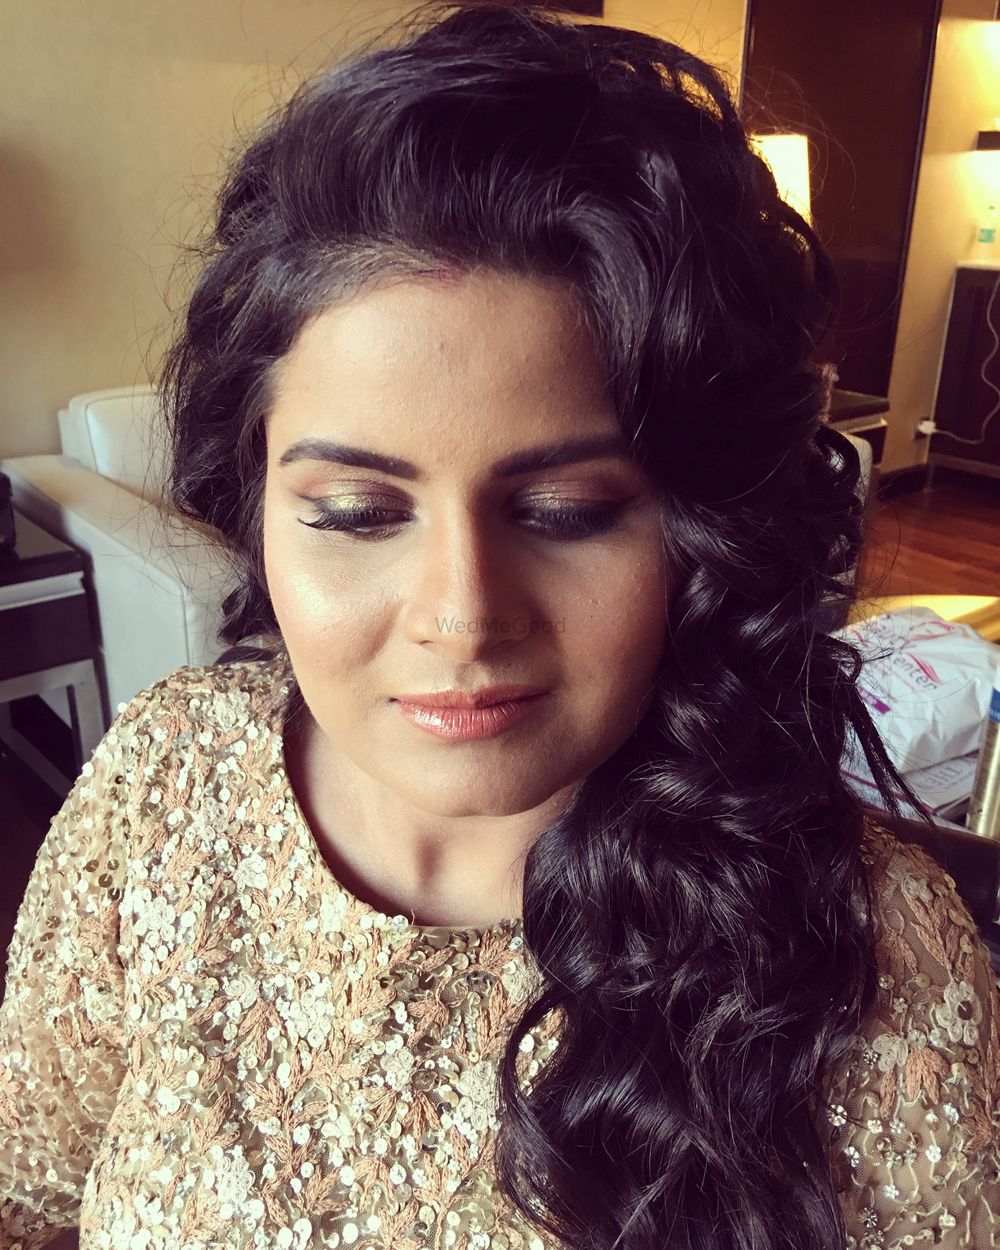 Photo From The contemporary Bengali Bride_Supriya's Wedding and Reception look  - By Nivritti Chandra